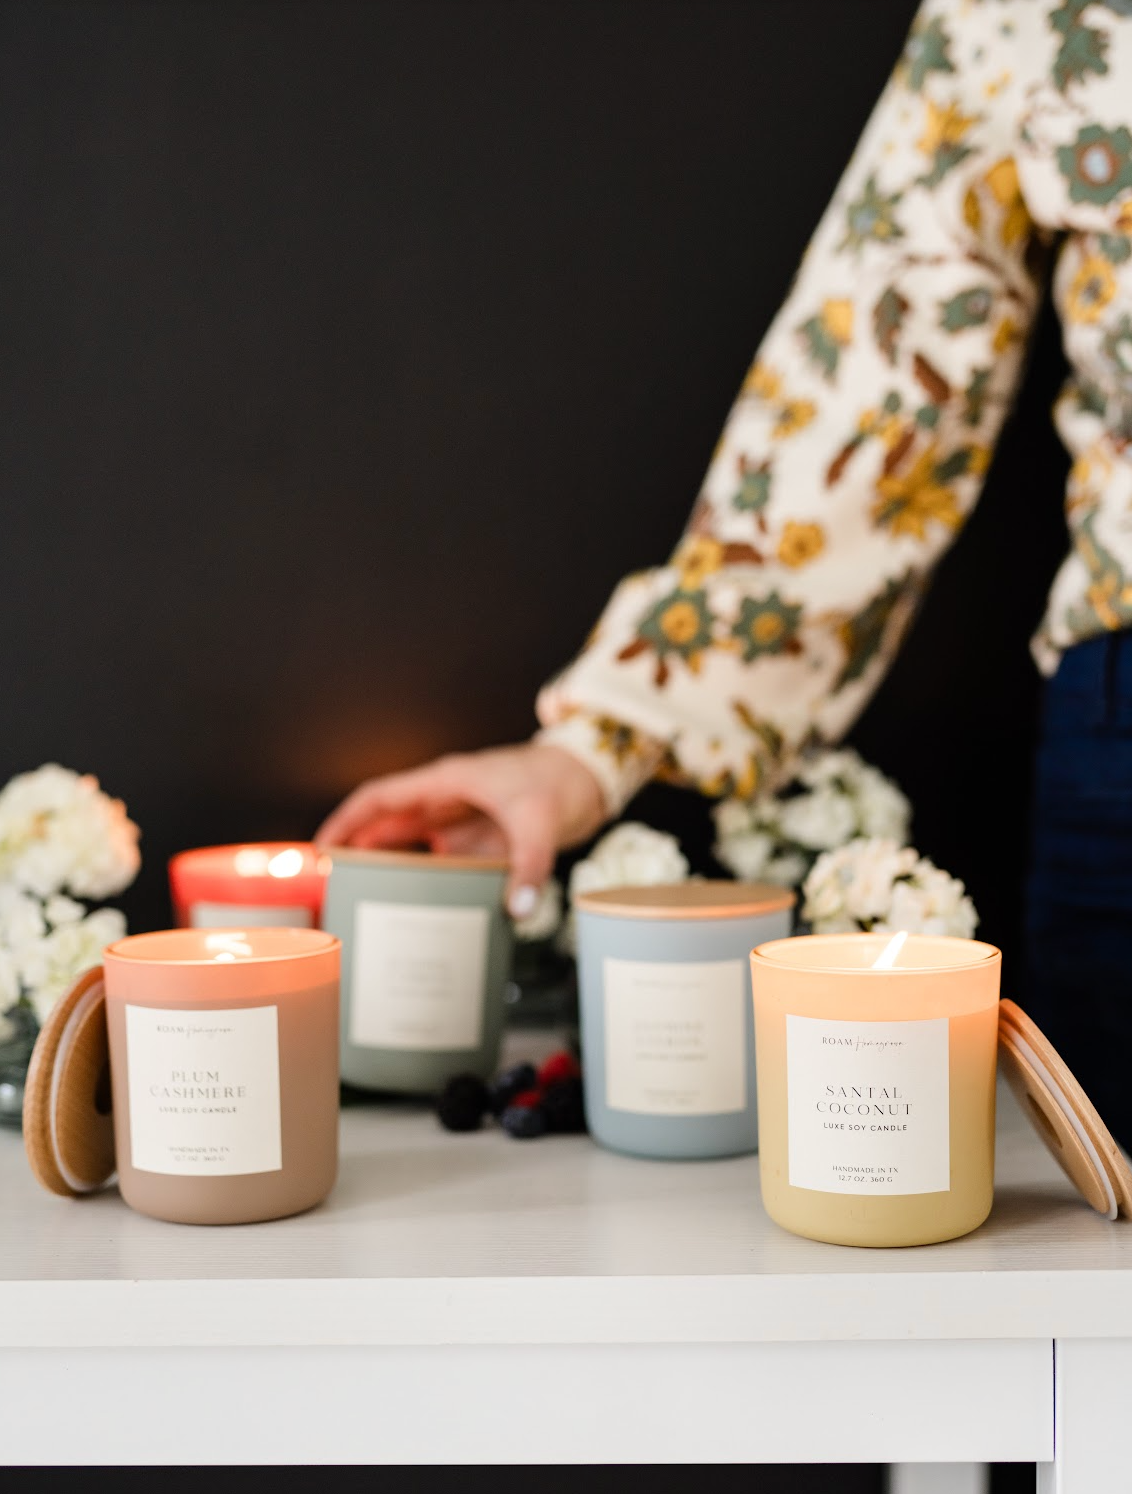 Brighter Days Soy Candle, Lavender Driftwood - ROAM Homegrown